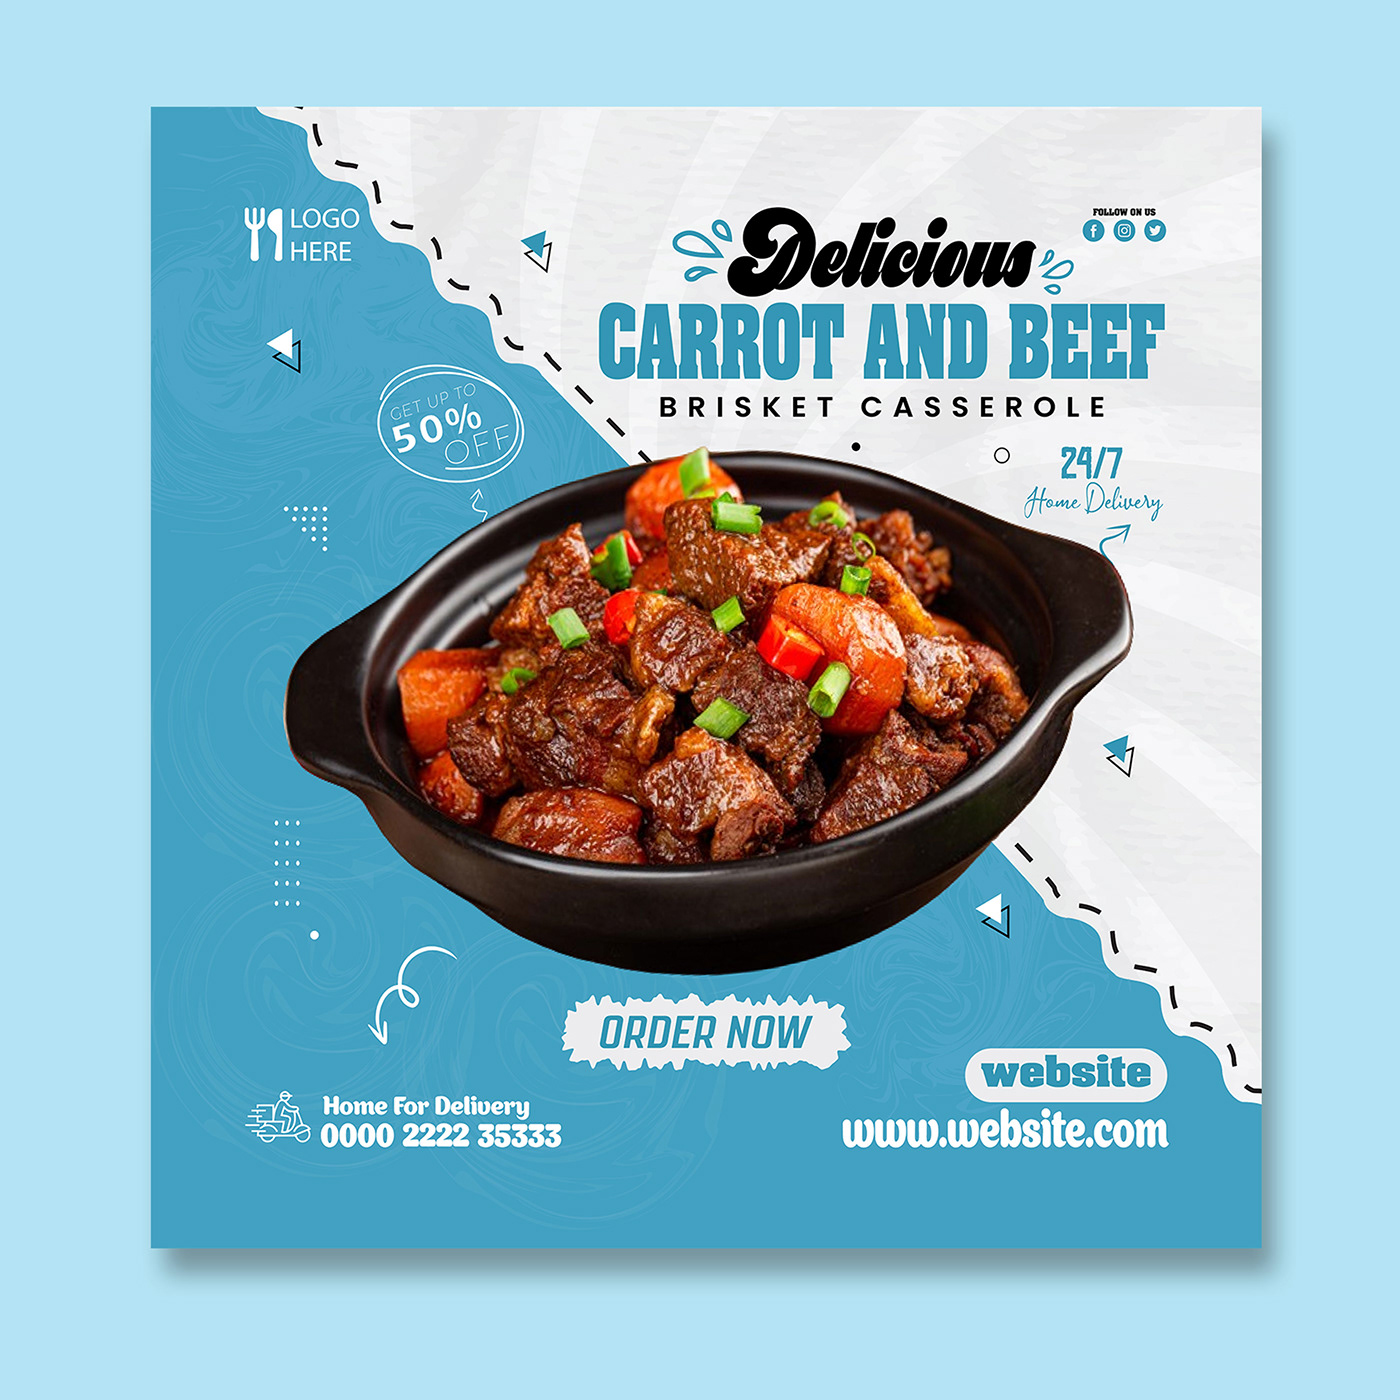 Delicious Carrot and Beef Brisket Casserole social media post